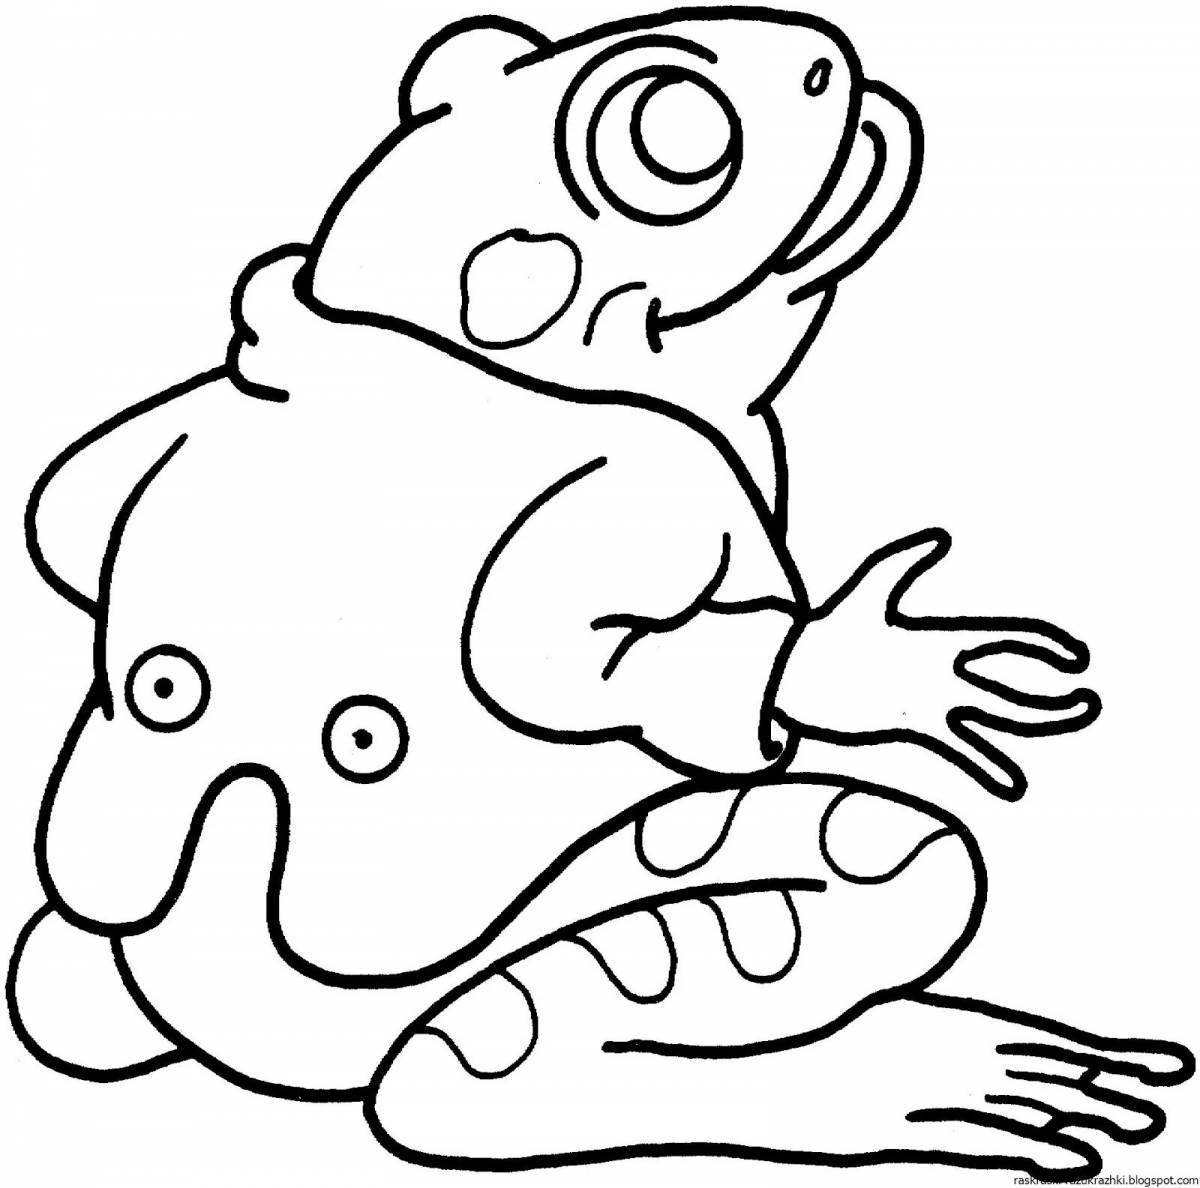 Animated toad coloring page for kids